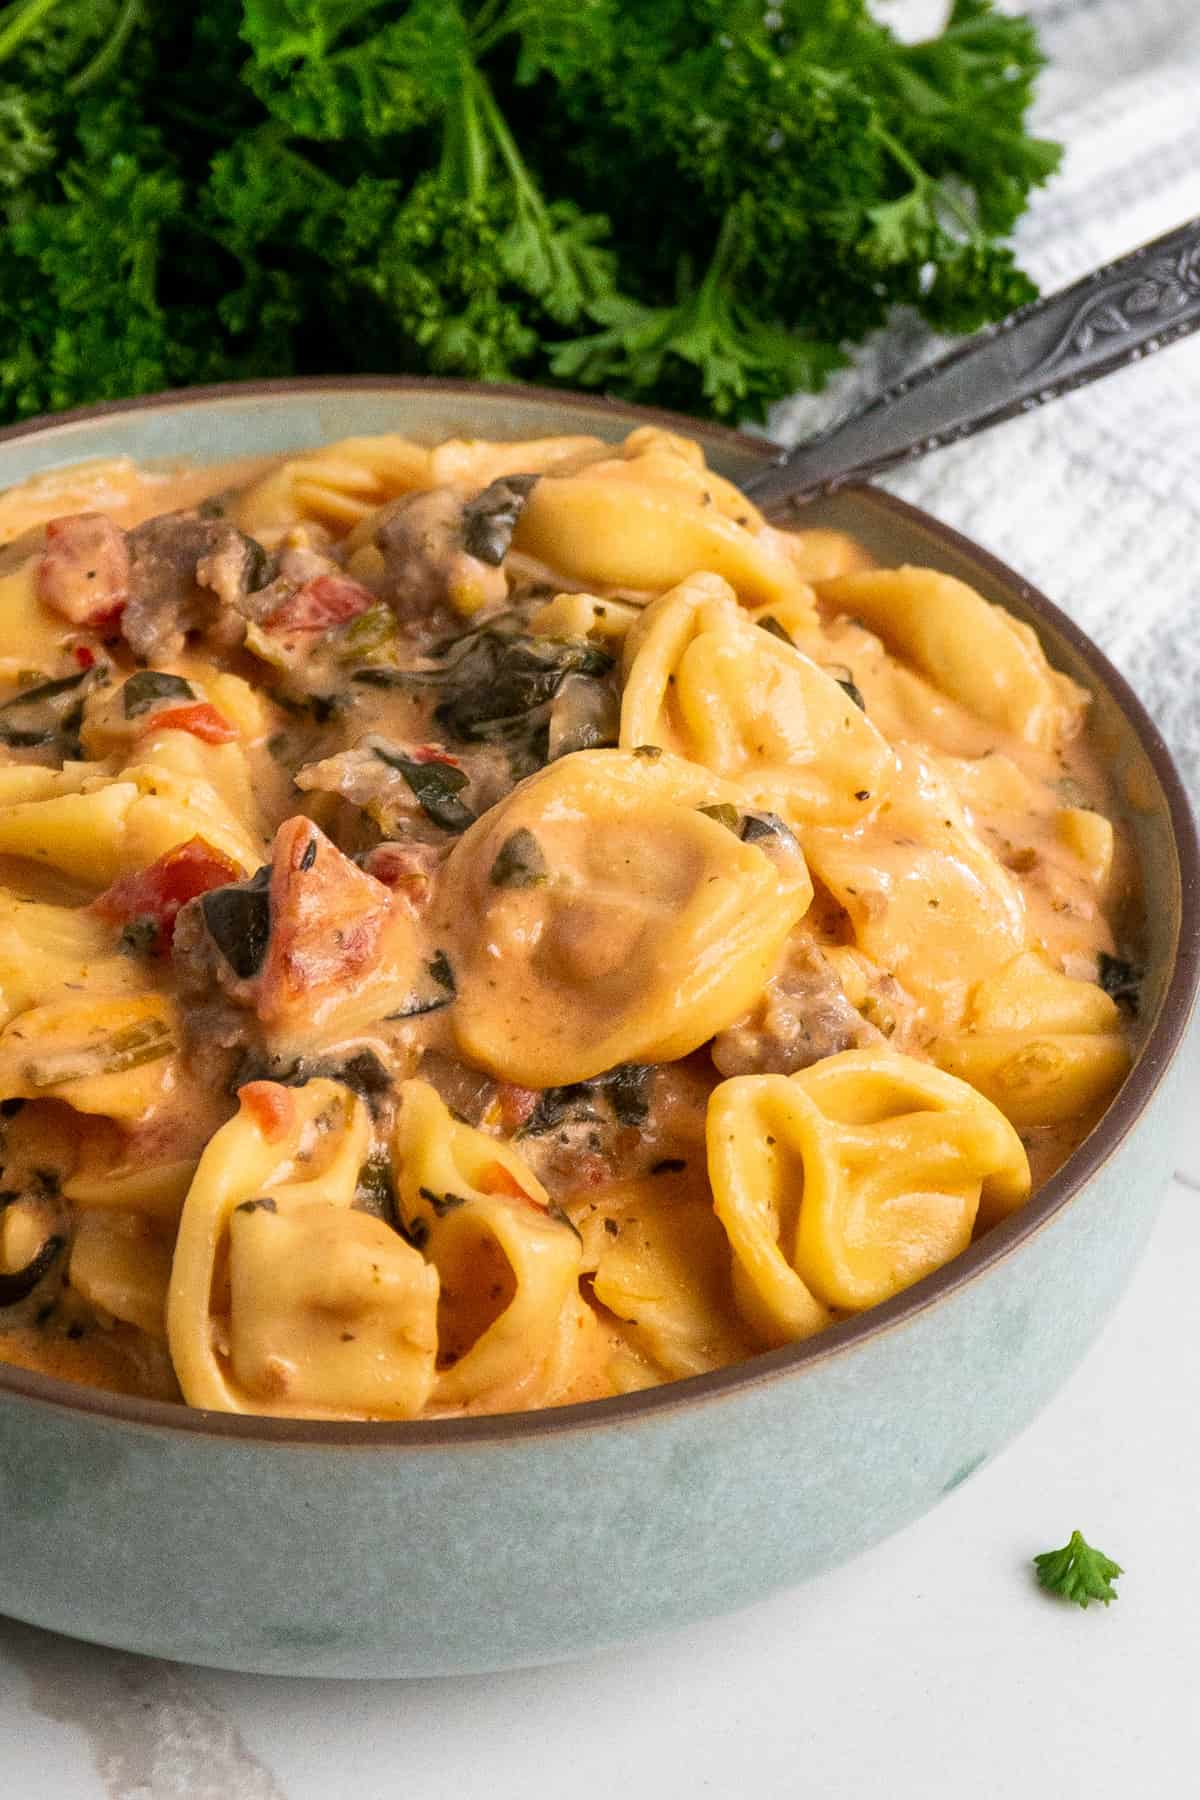 Close-up of a bowl of tortellini with sauce, sausage and tomatoes.